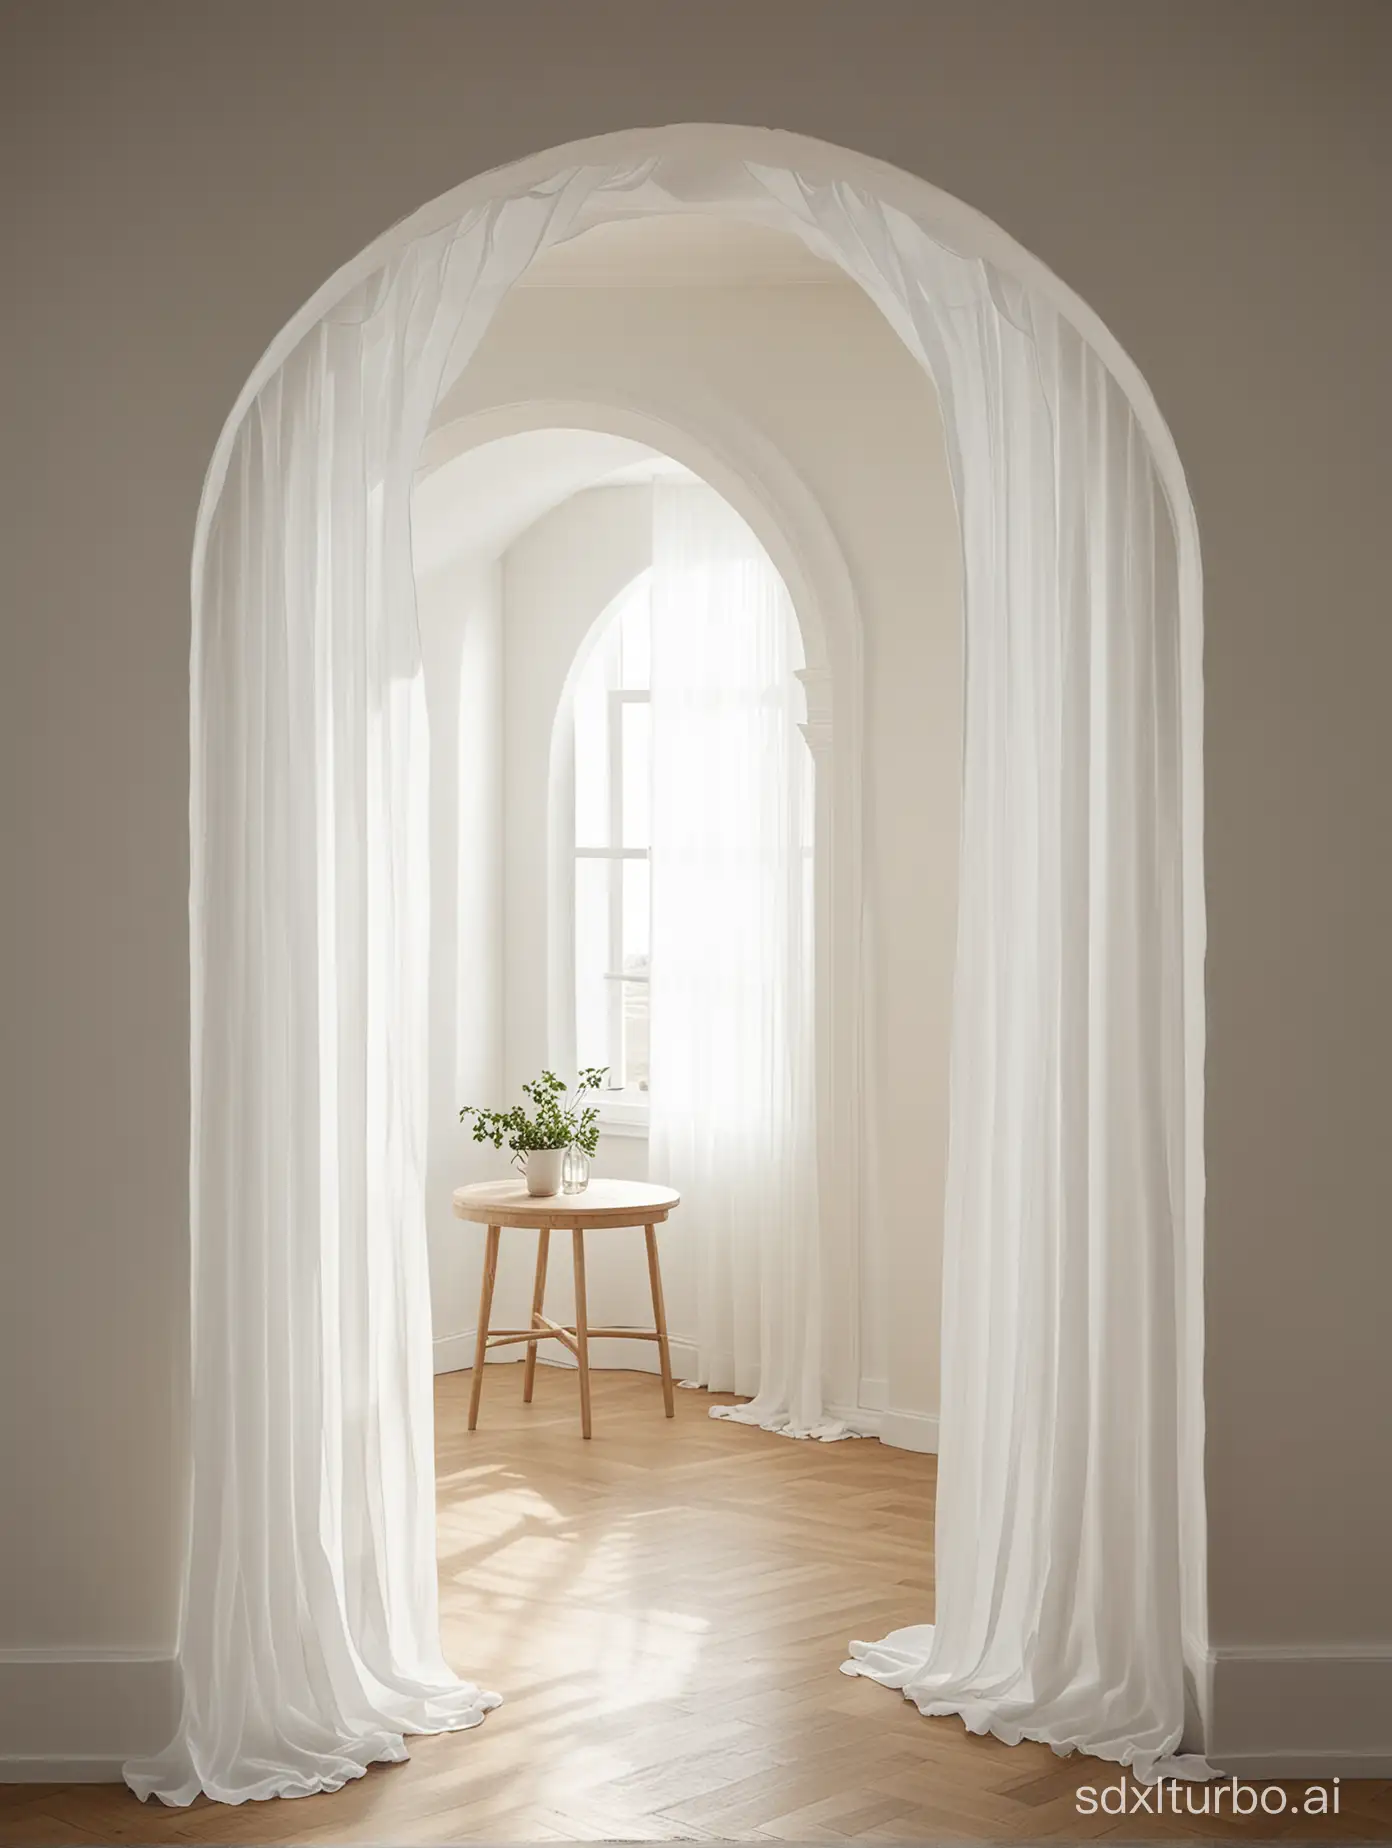 Ethereal-Archway-Illuminated-by-Soft-Light-Through-White-Gauze-Curtains